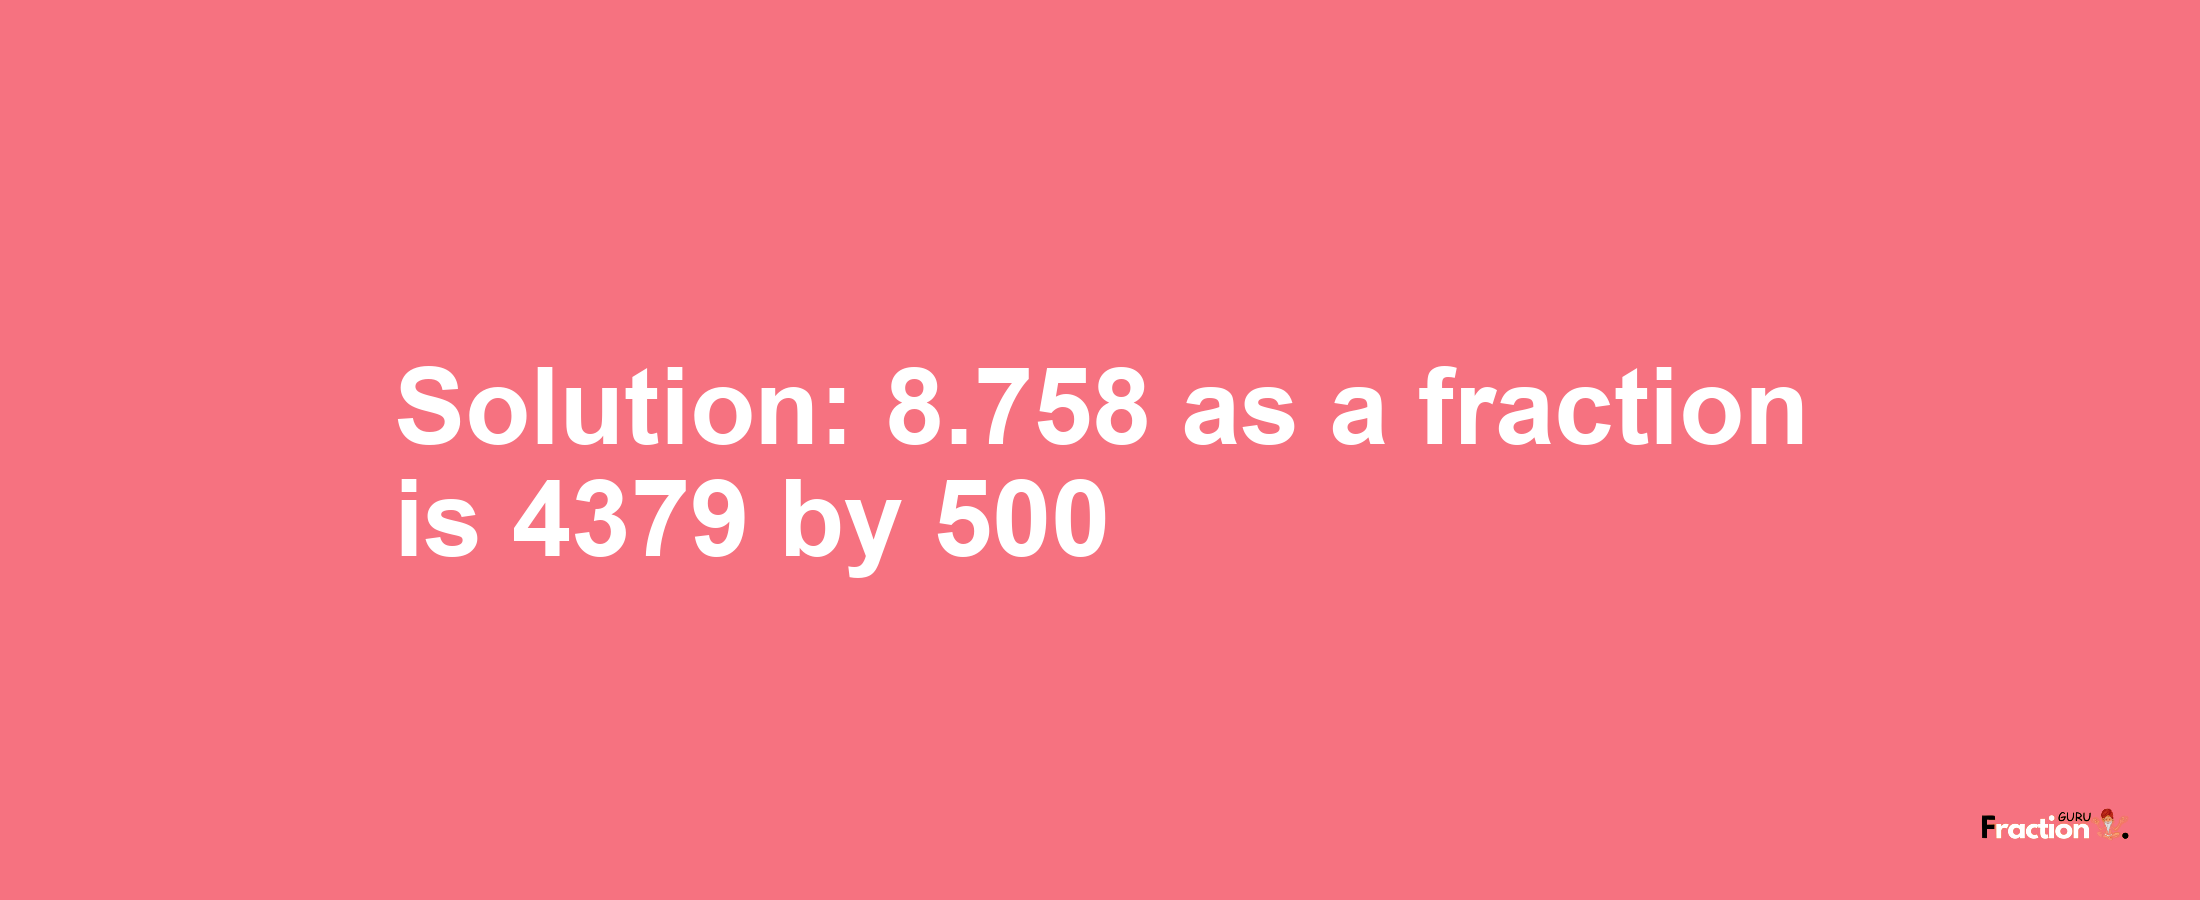 Solution:8.758 as a fraction is 4379/500